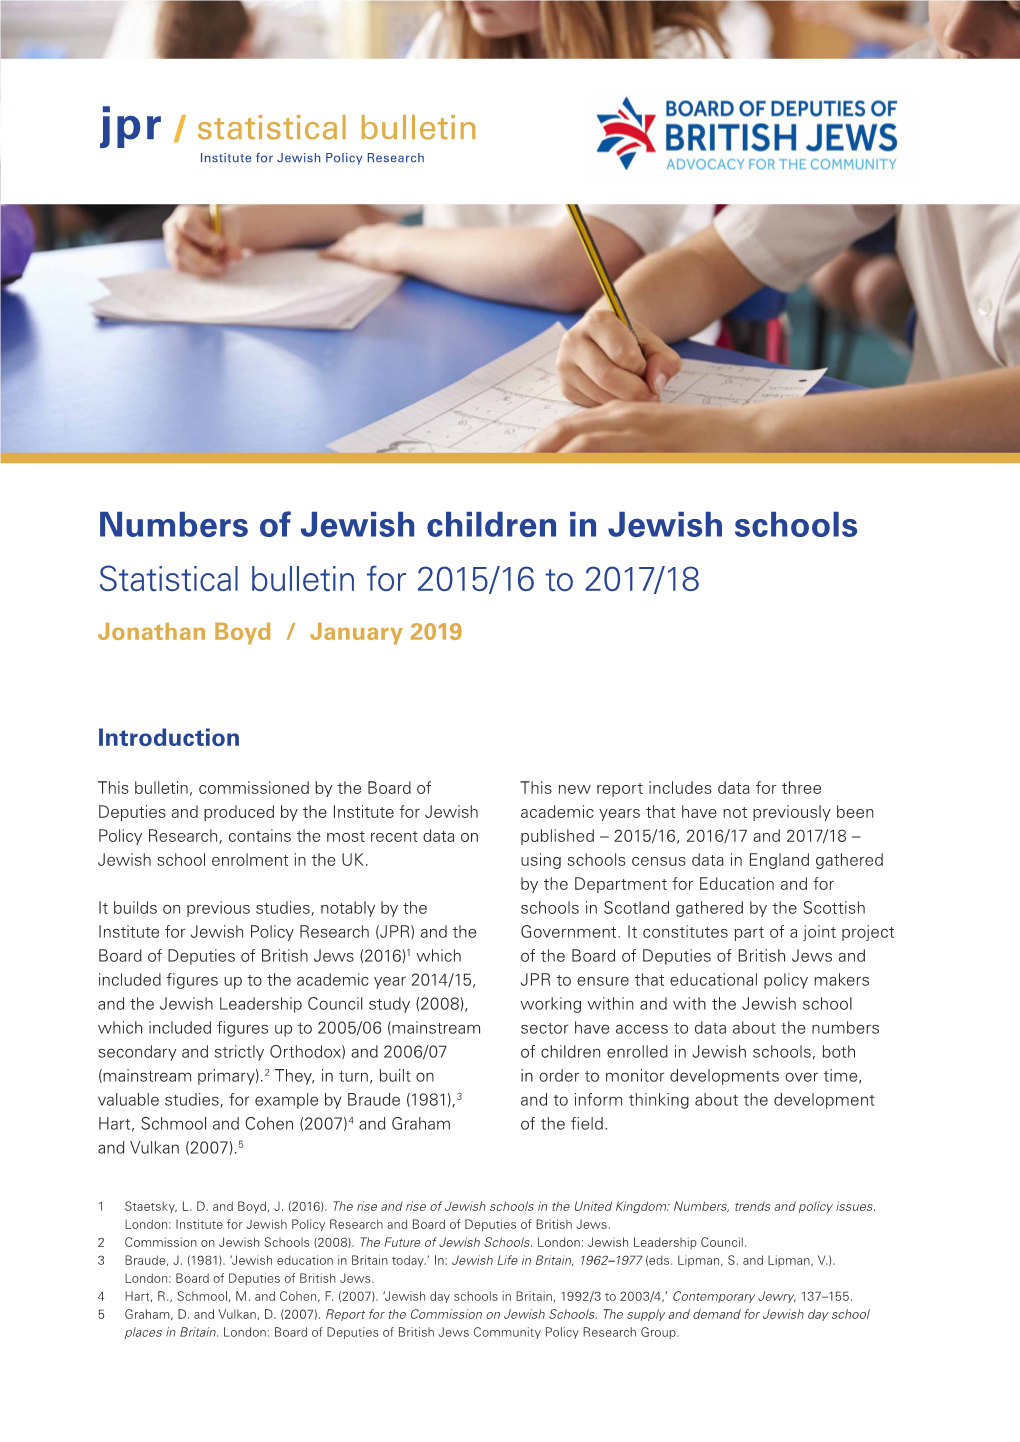 Numbers of Jewish Children in Jewish Schools Statistical Bulletin for 2015/16 to 2017/18 Jonathan Boyd / January 2019